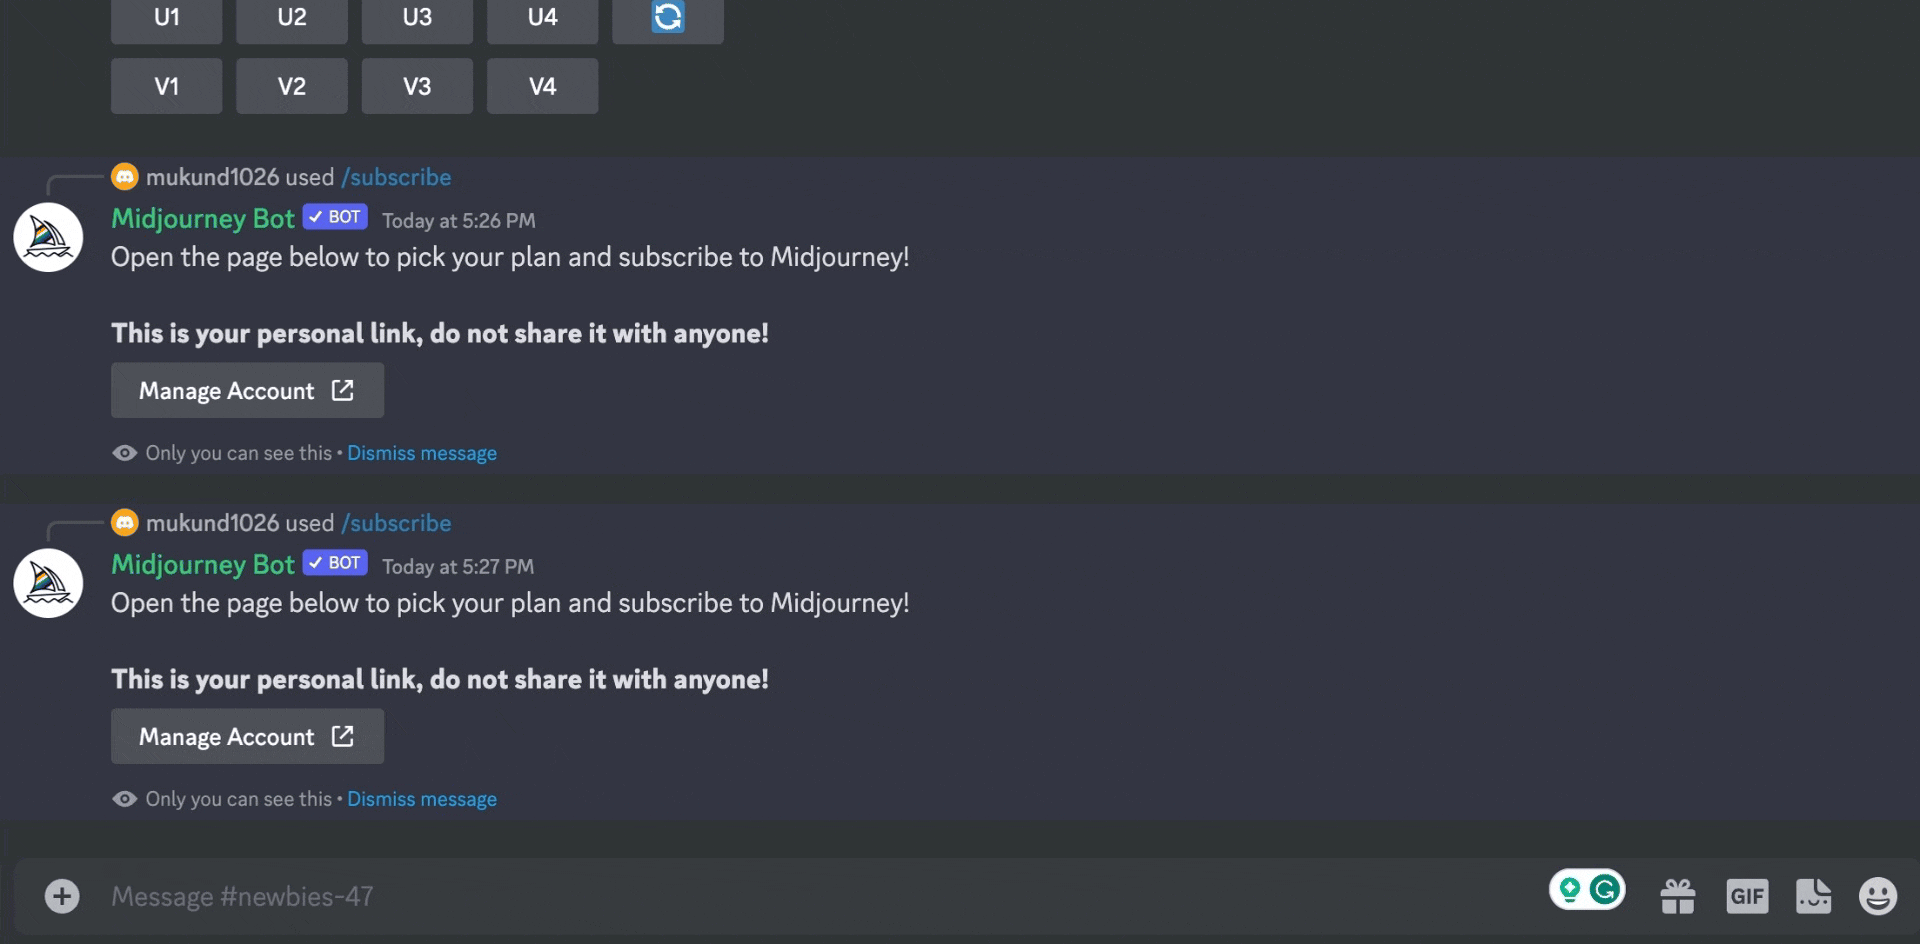 Prompt /subscribe in discord to cancel midjourney plan